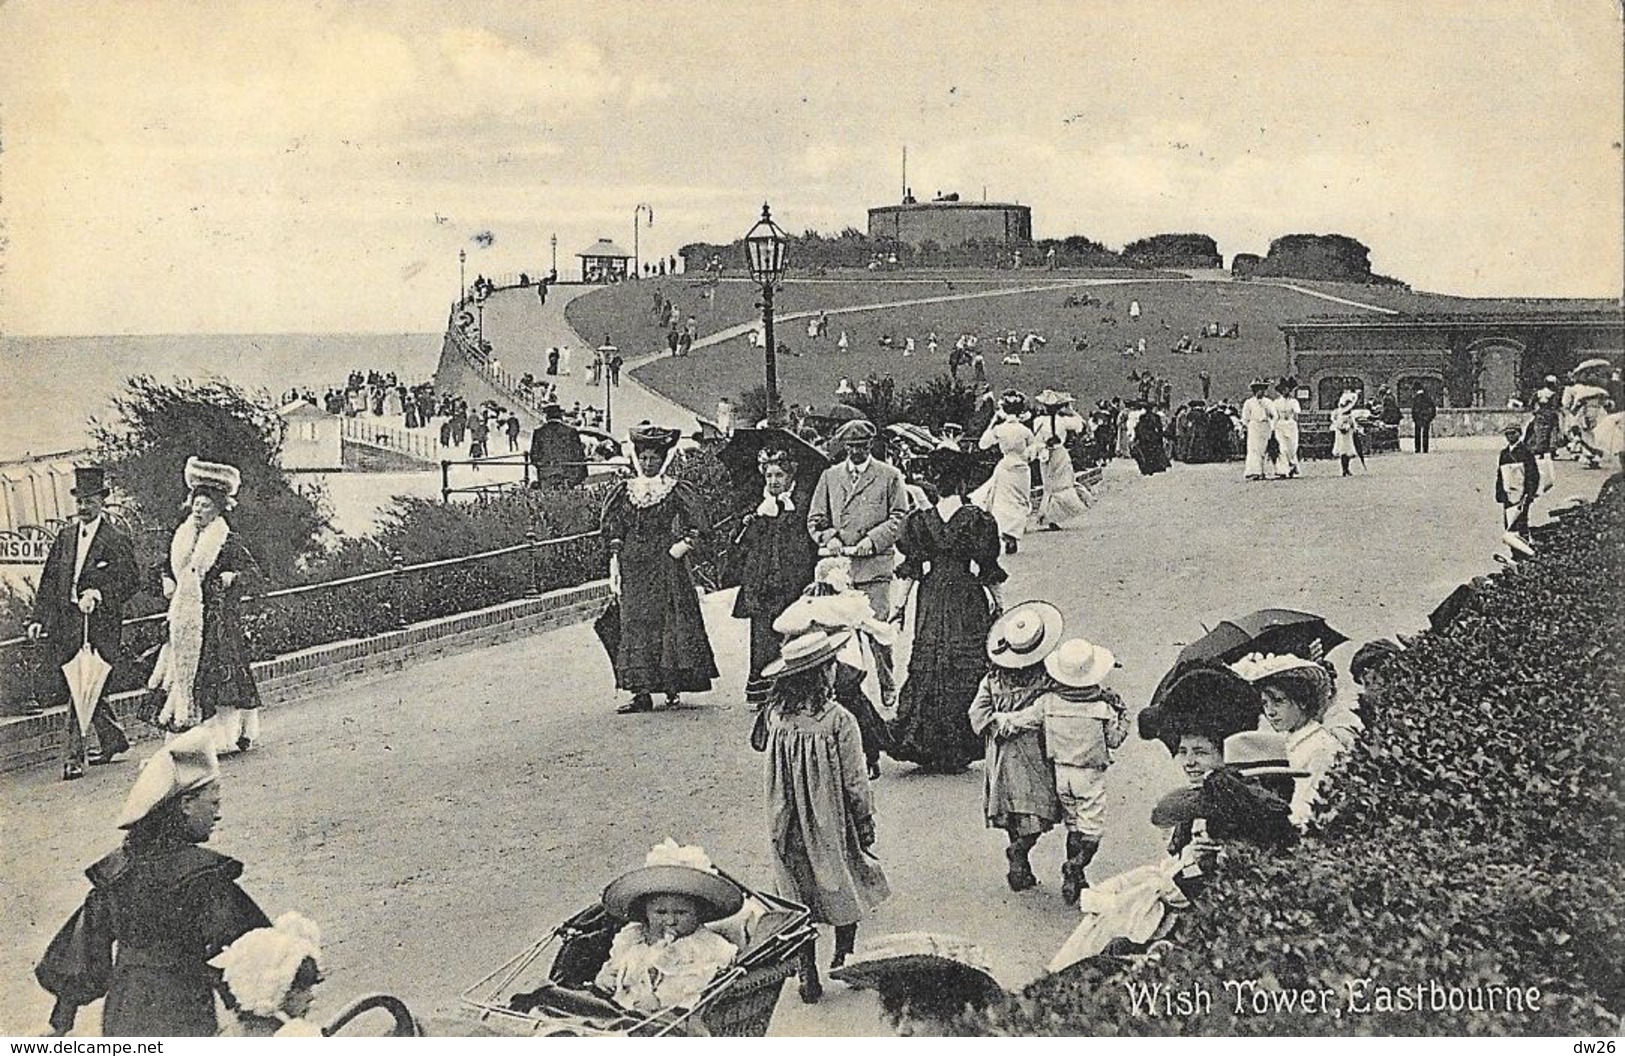 Wish Tower Eastbourne 1914 - Eastbourne